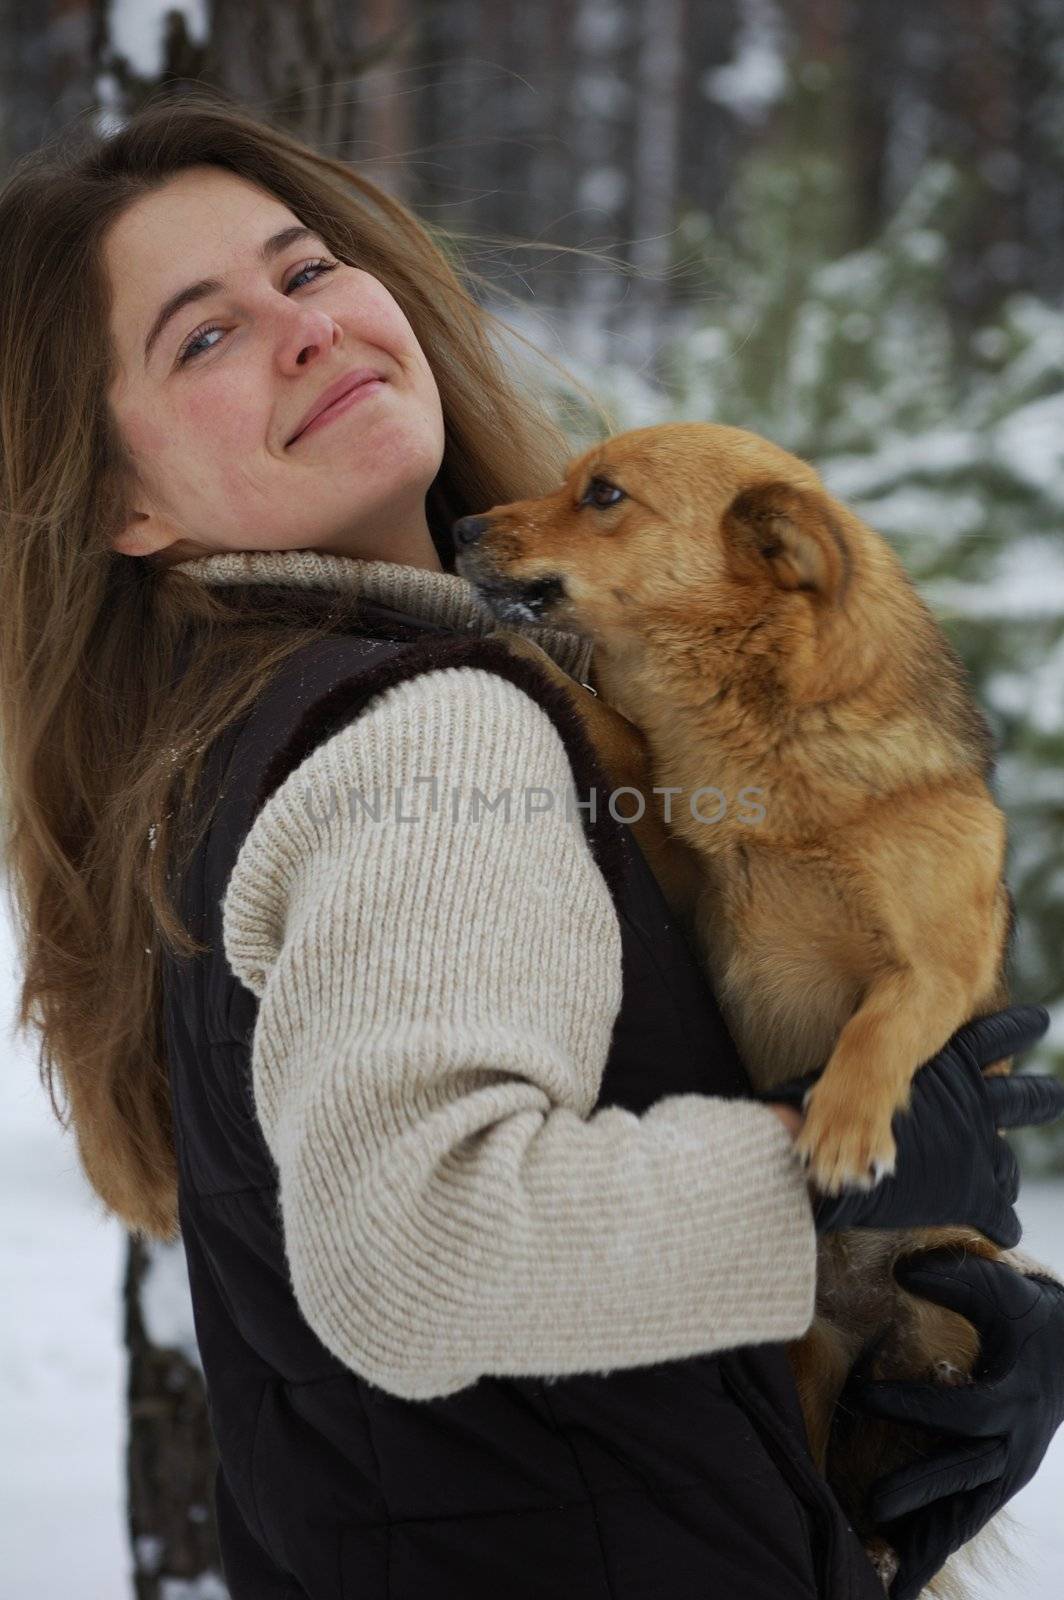 girl and a white dog in winter forest by kasim